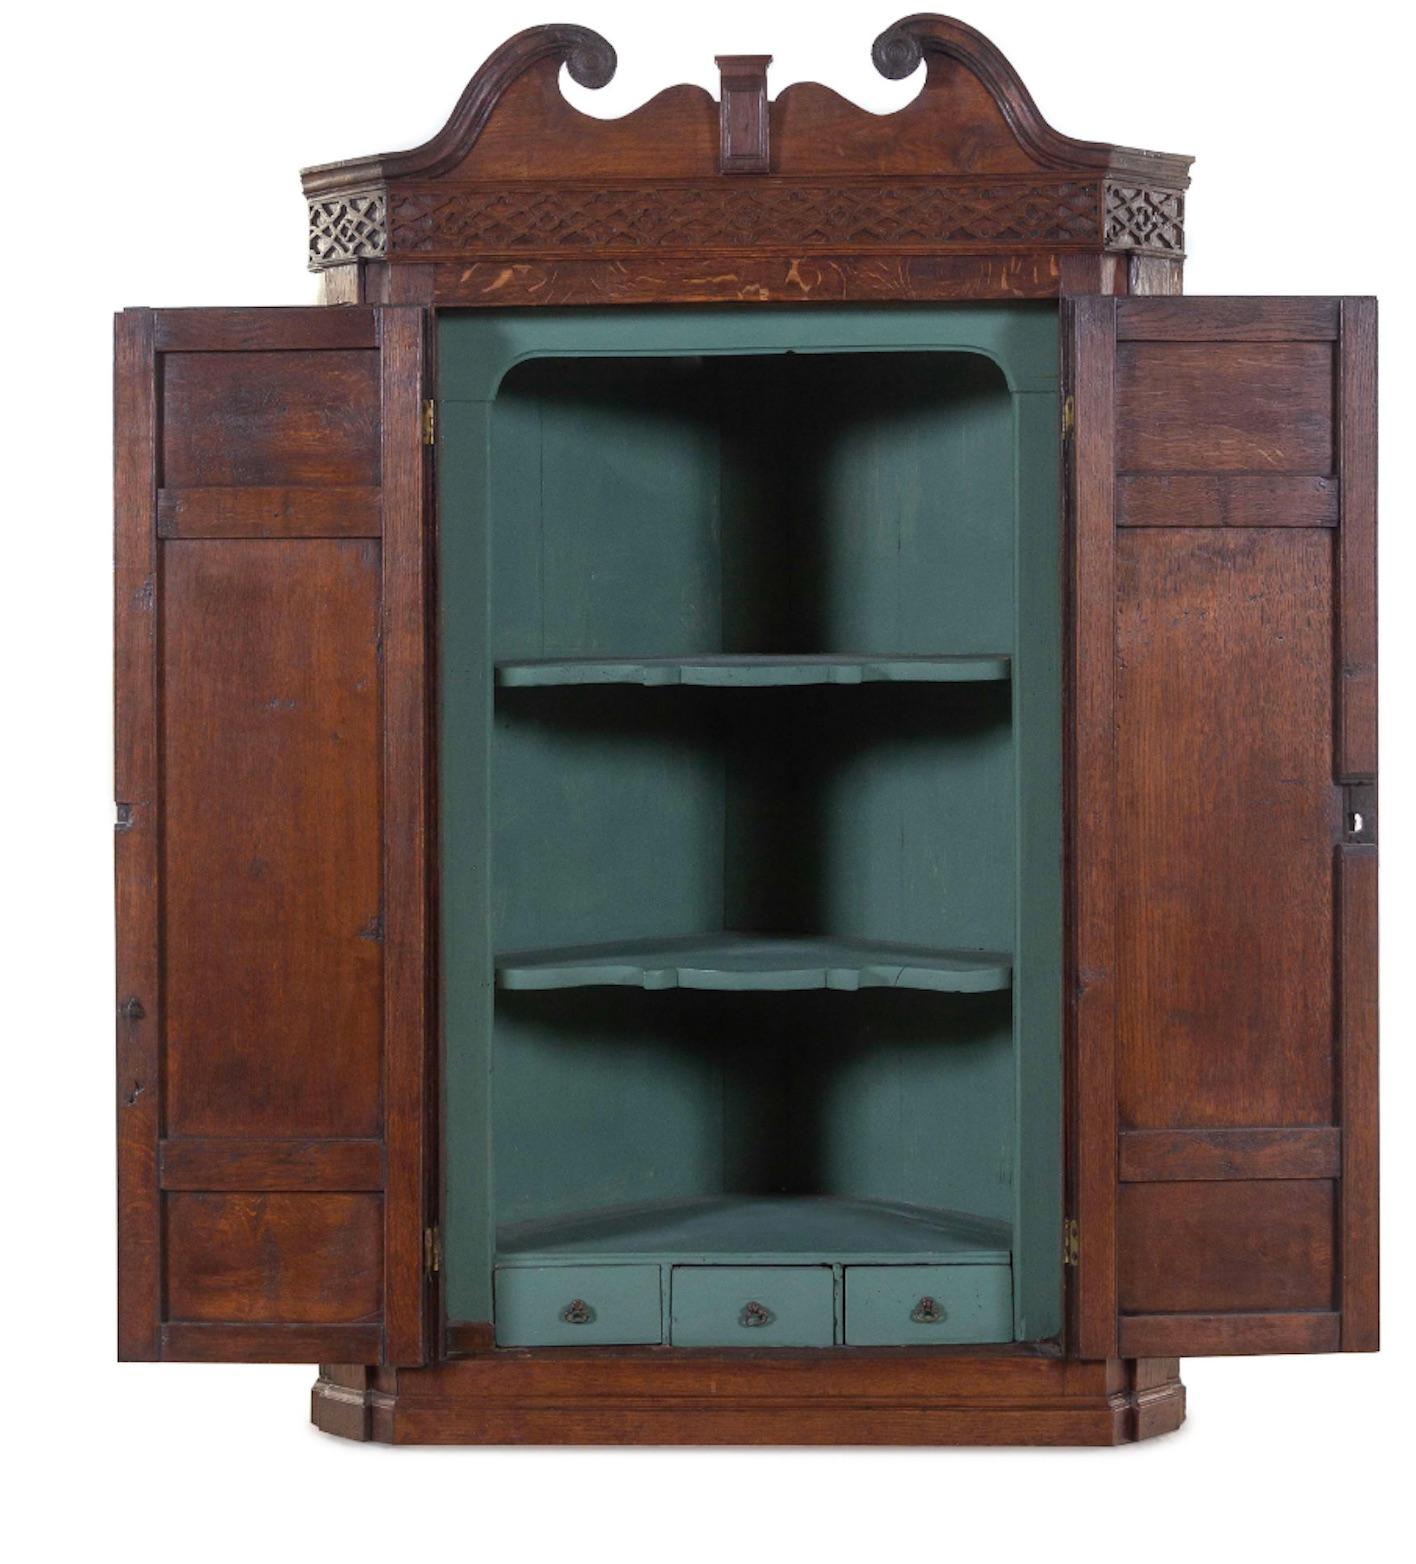 George III Oak Hanging Corner Cabinet, Great Scale, Color and Proportions For Sale 1